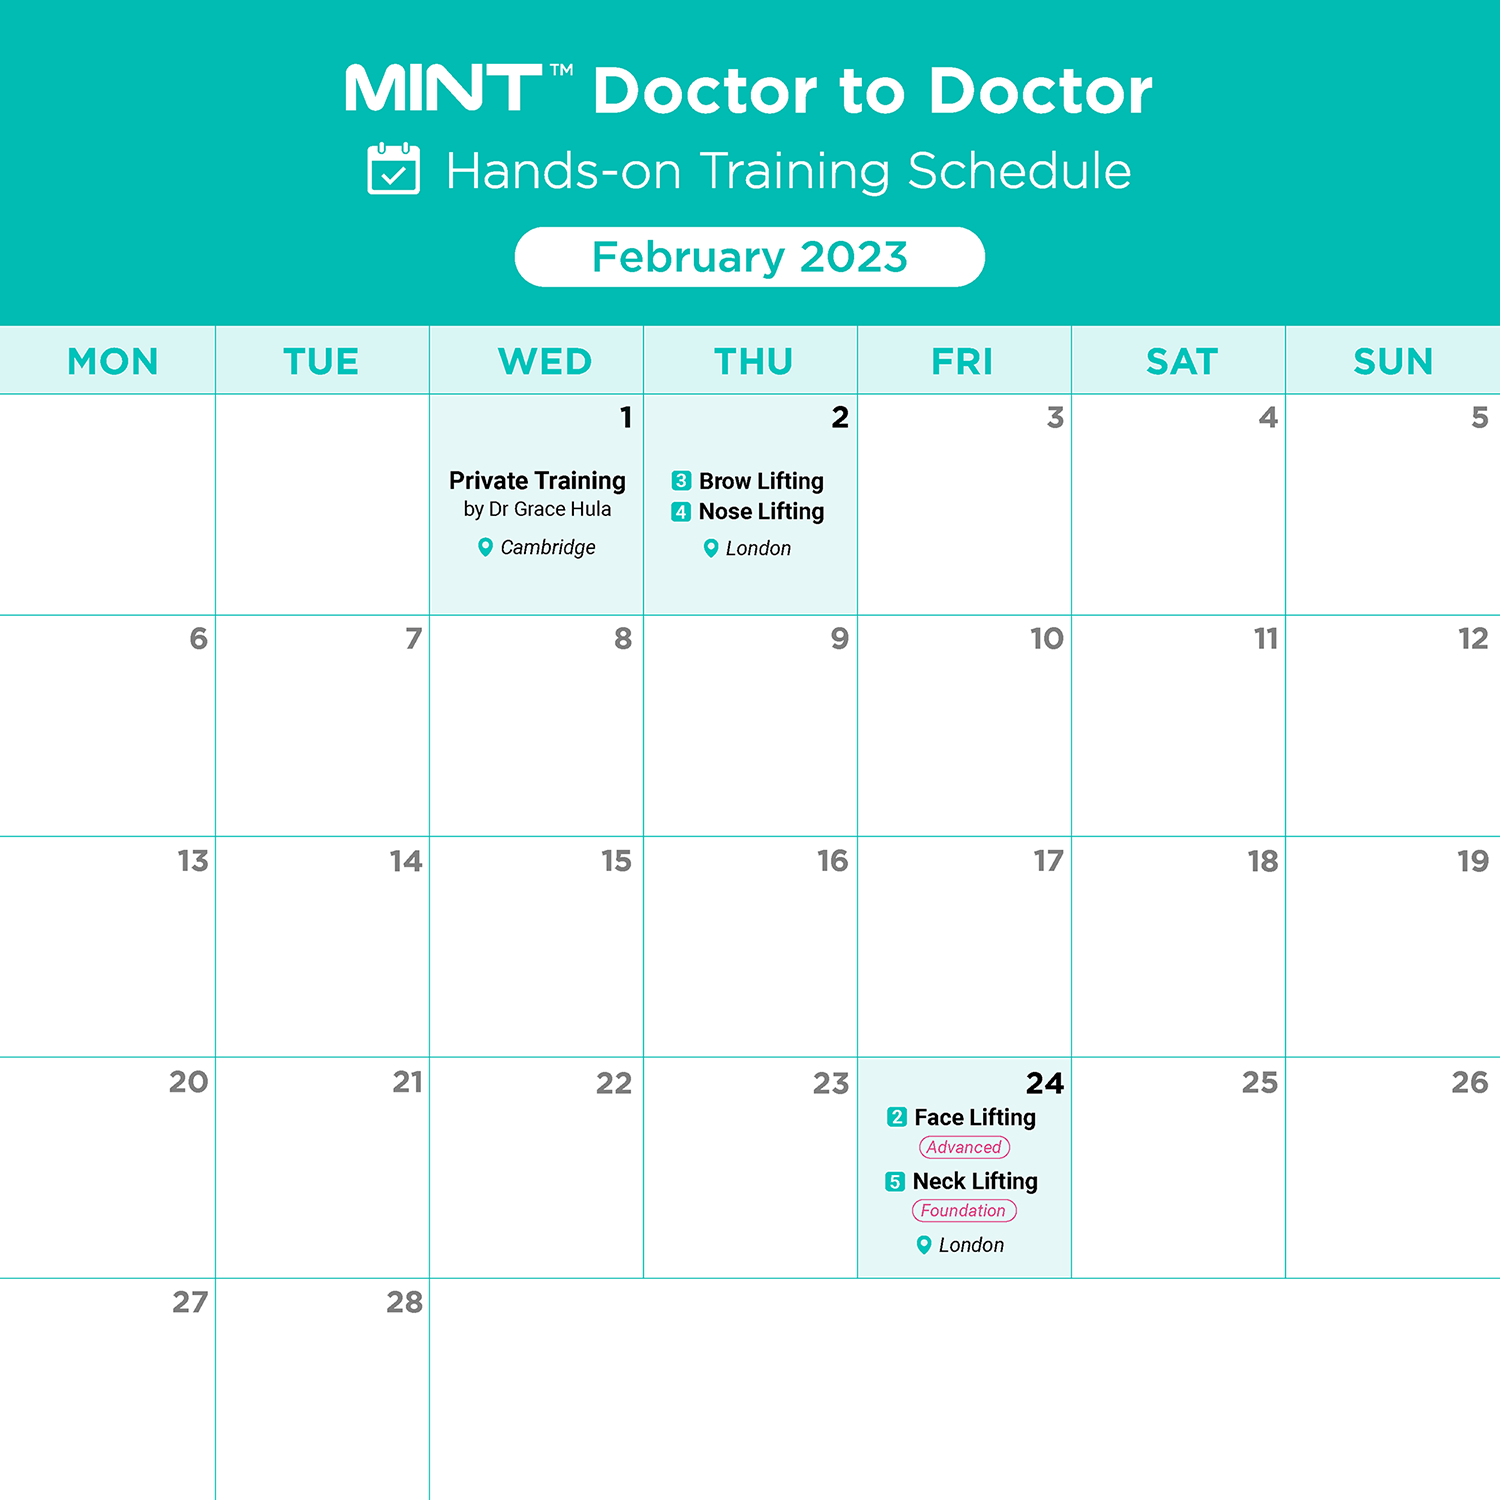 MINT PDO Doctor to Doctor Hands-on Training Schedule for January 2023